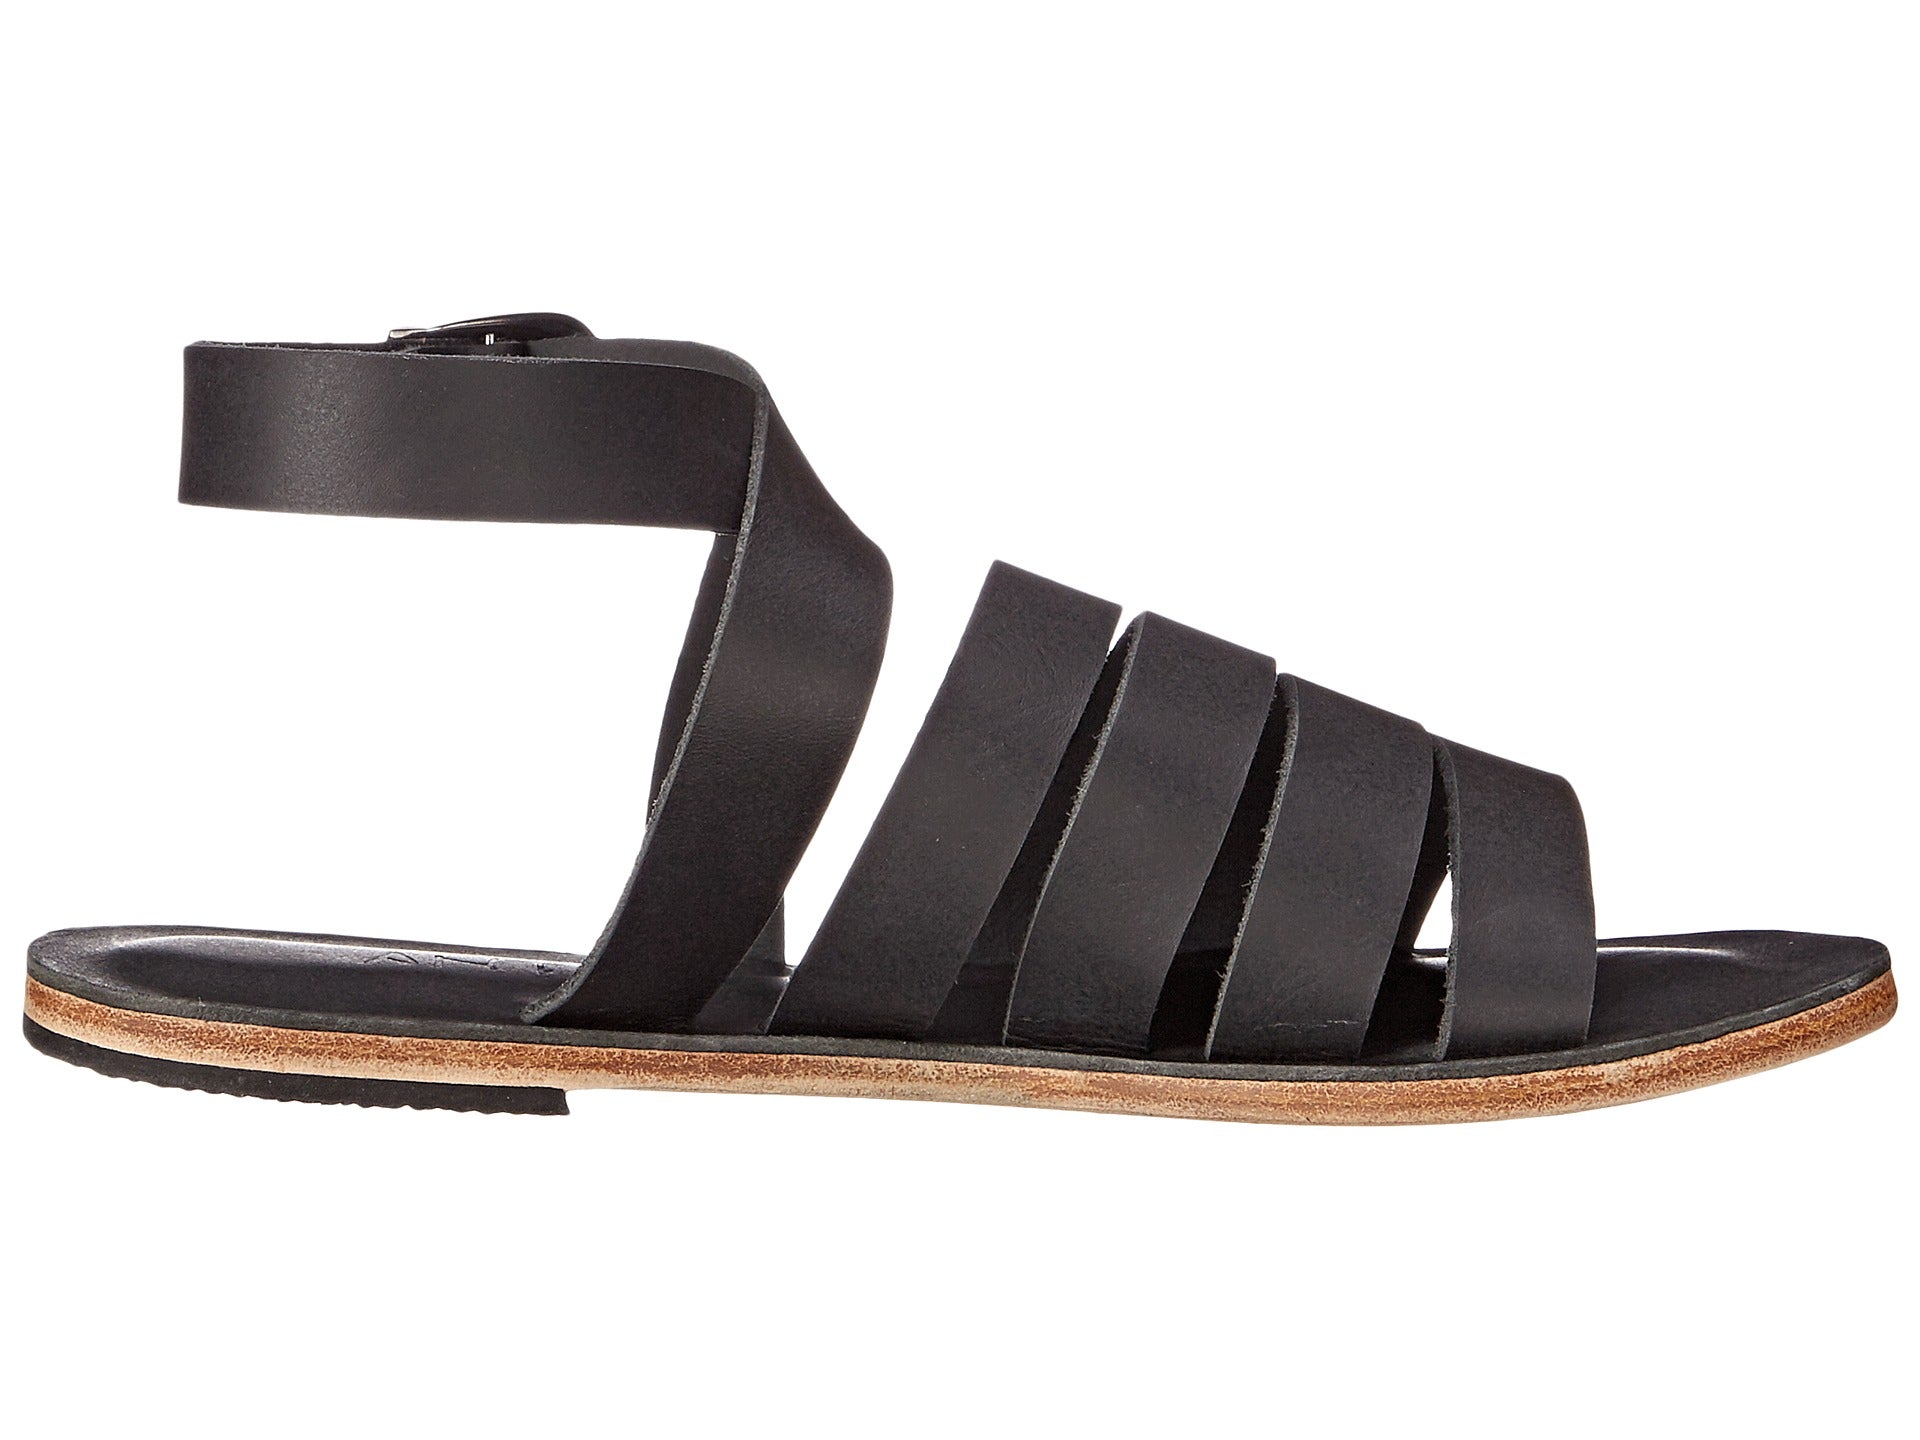 Santa Monica Blvd black, handmade leather sandals with anklet strap and buckle  - Side View